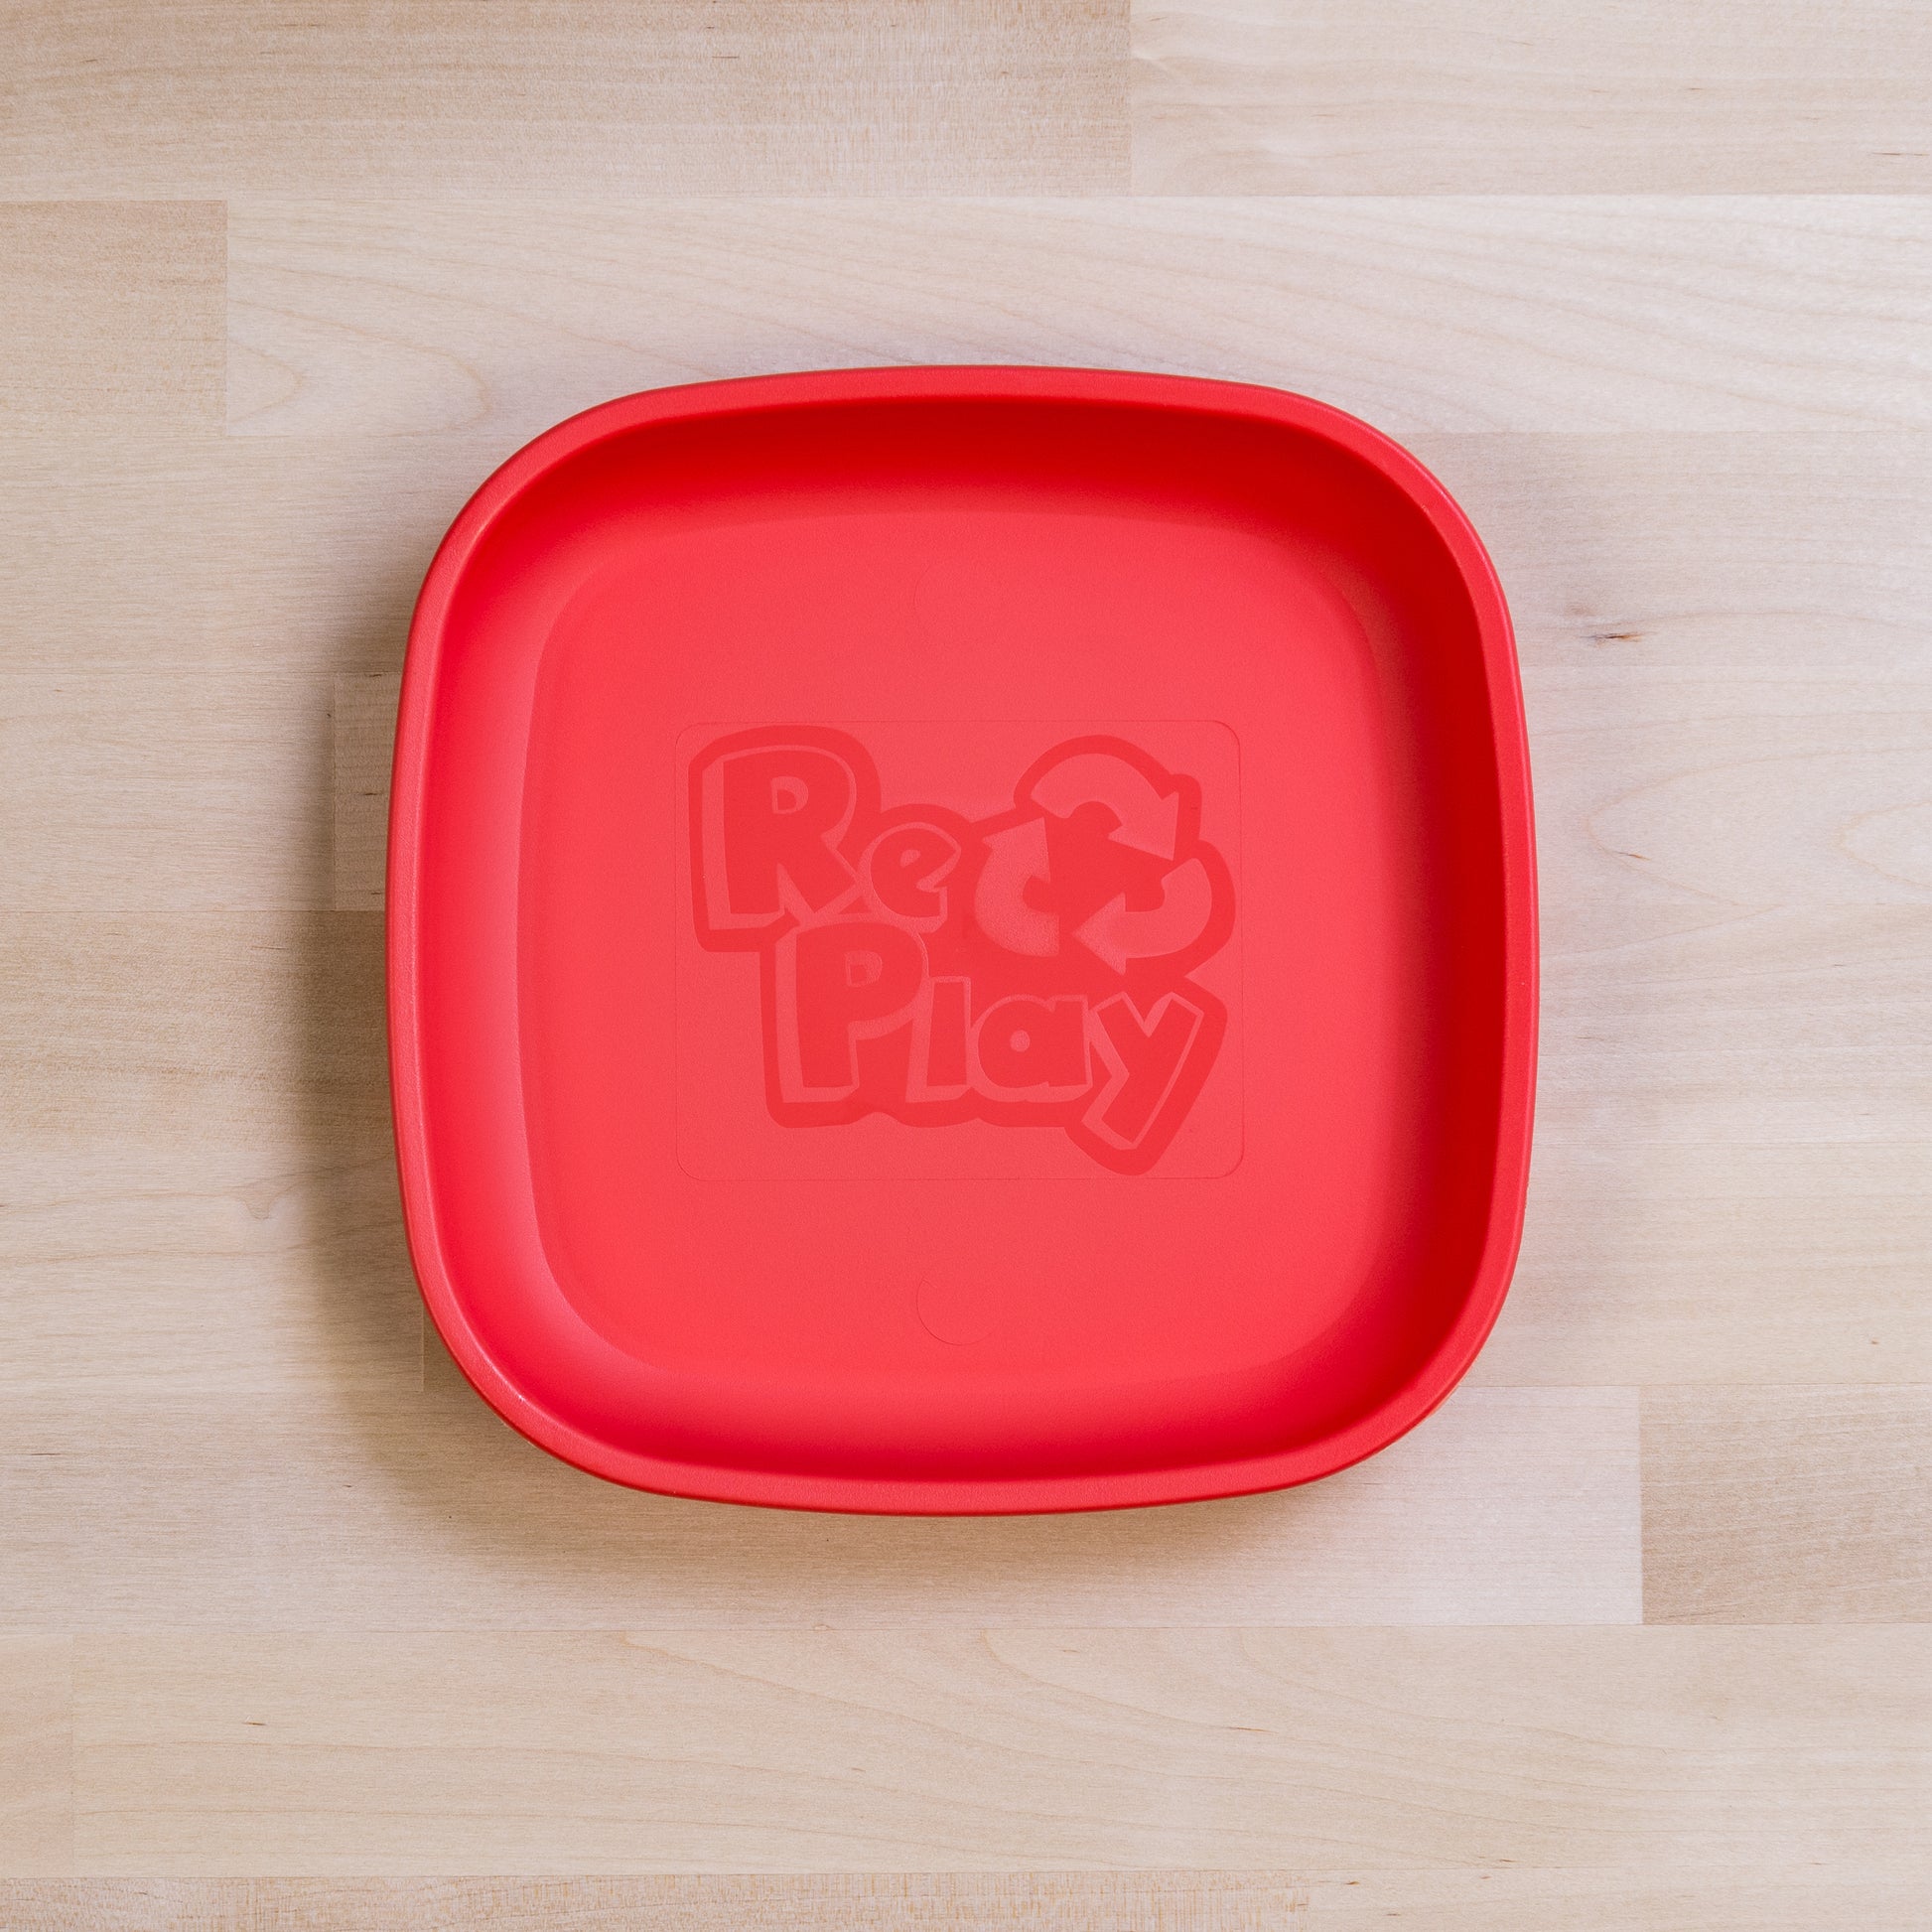 Re-Play Flat Plate Standard Size in Red from Bear & Moo